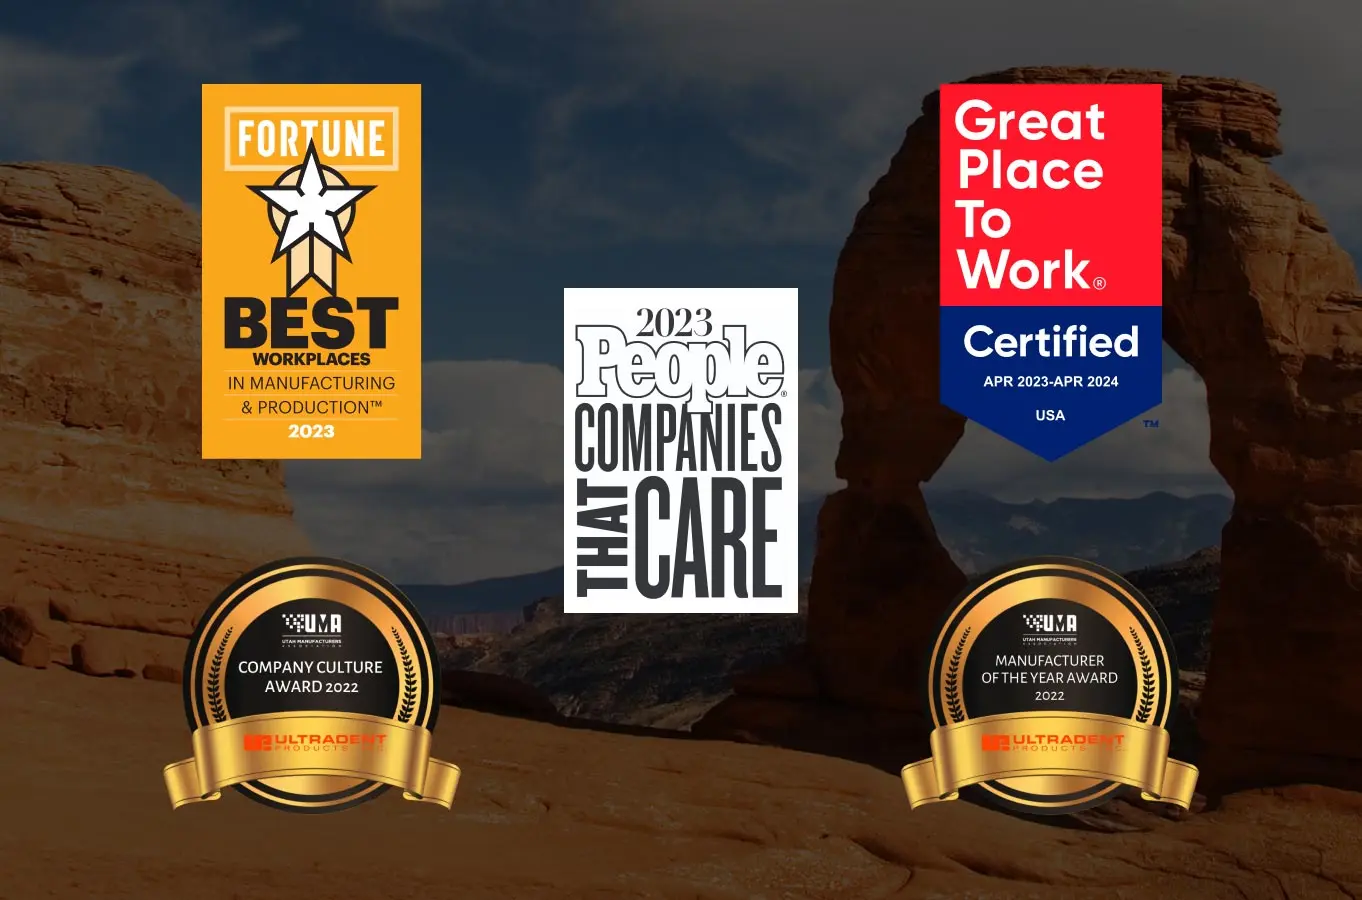 Awards earned Ultradent Products Inc.